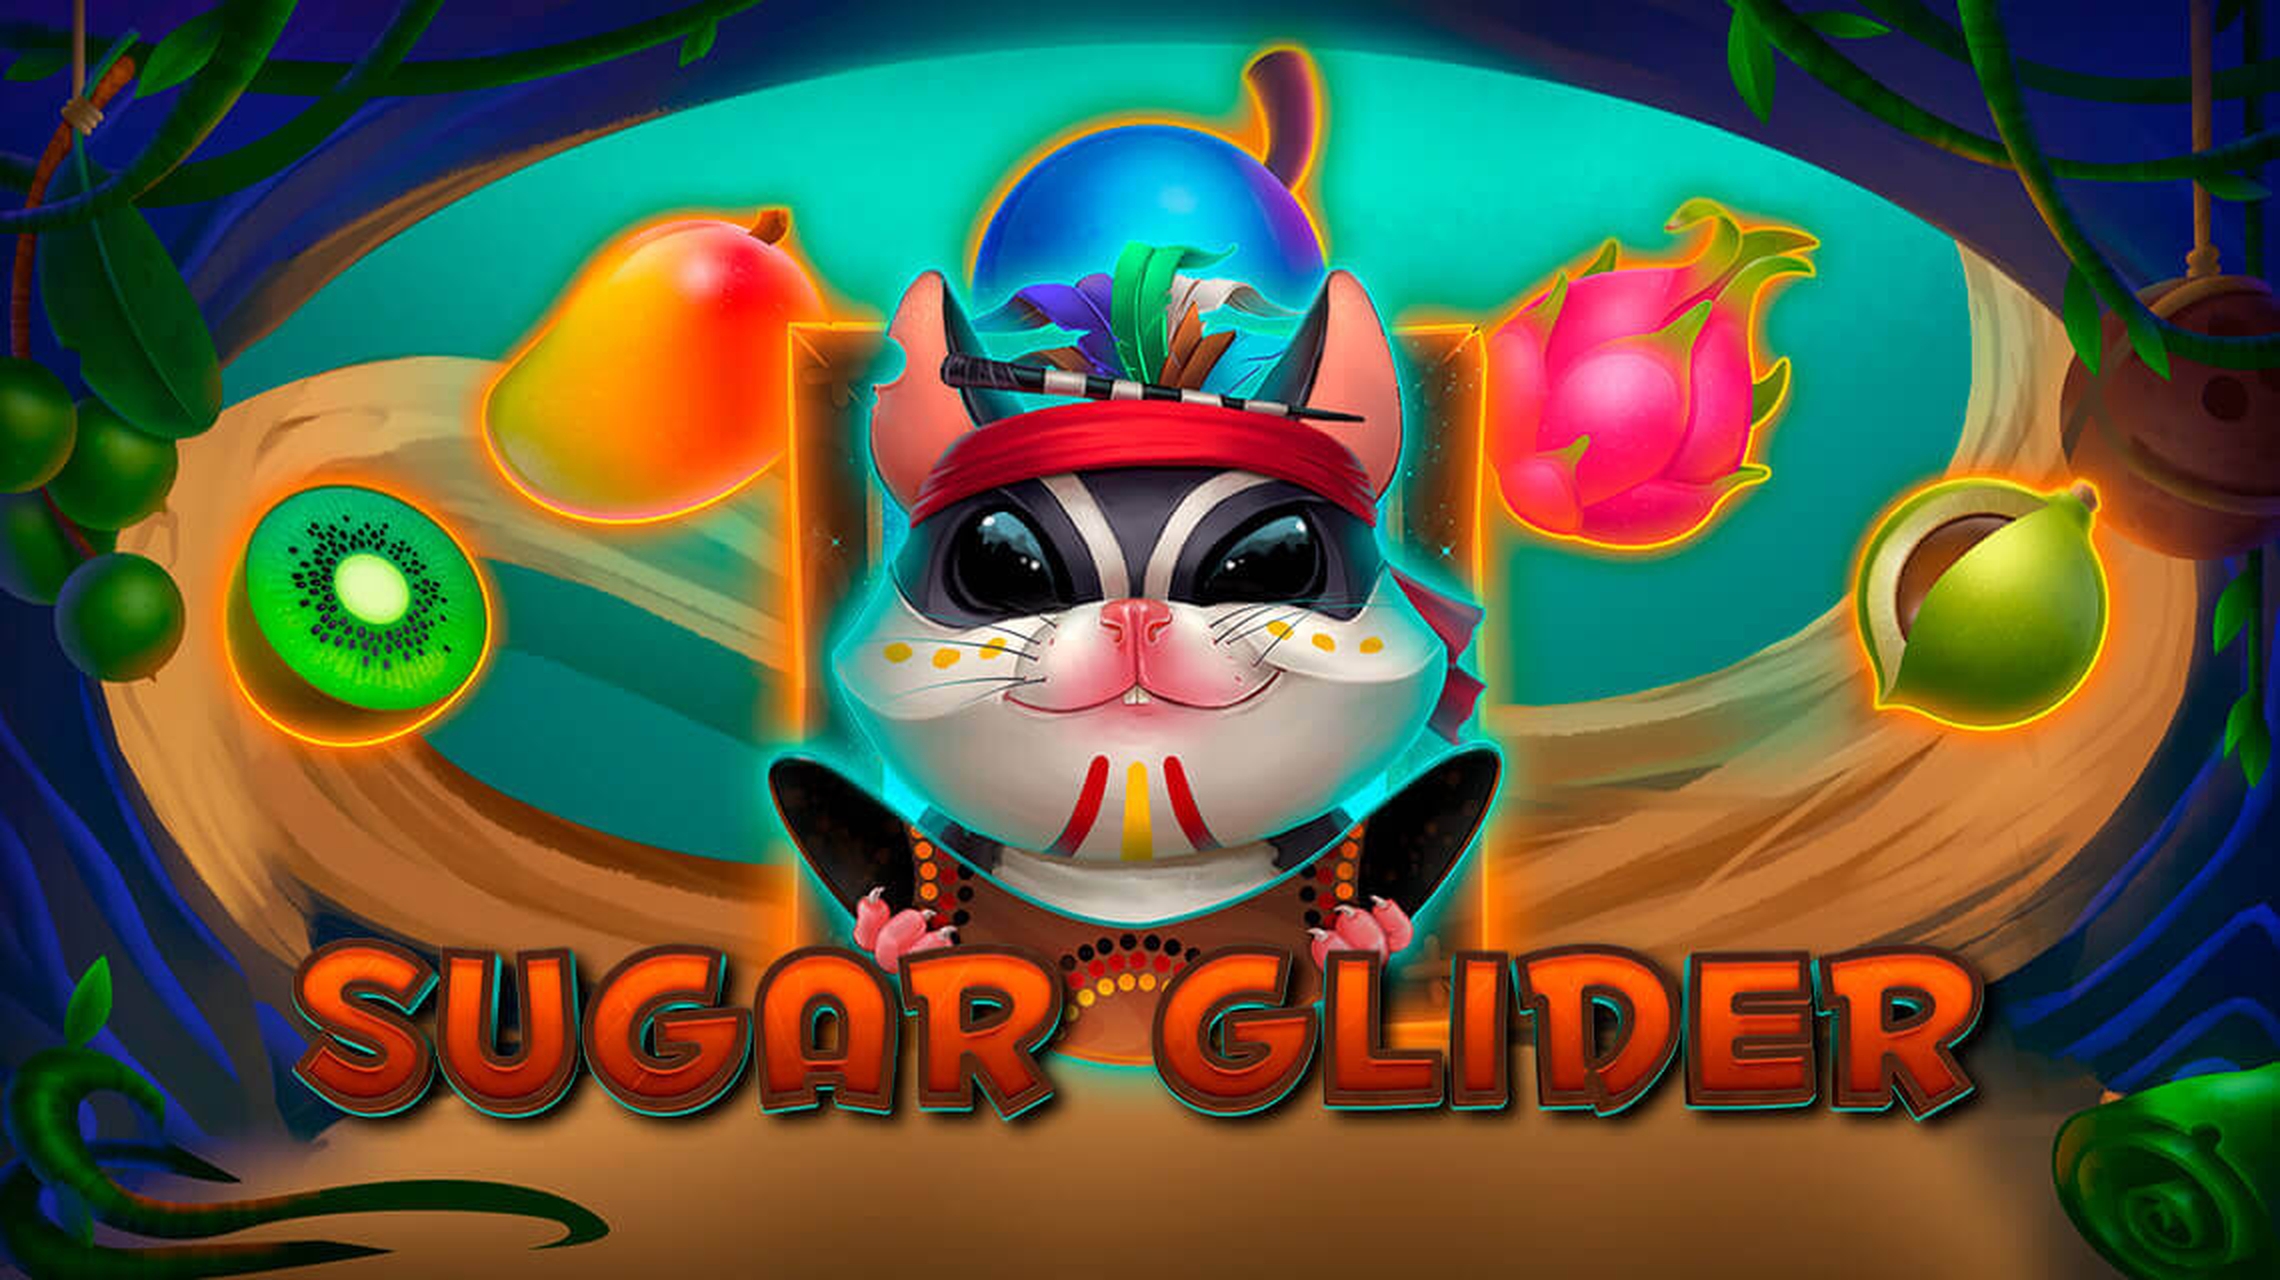 The Sugar Glider Online Slot Demo Game by Endorphina